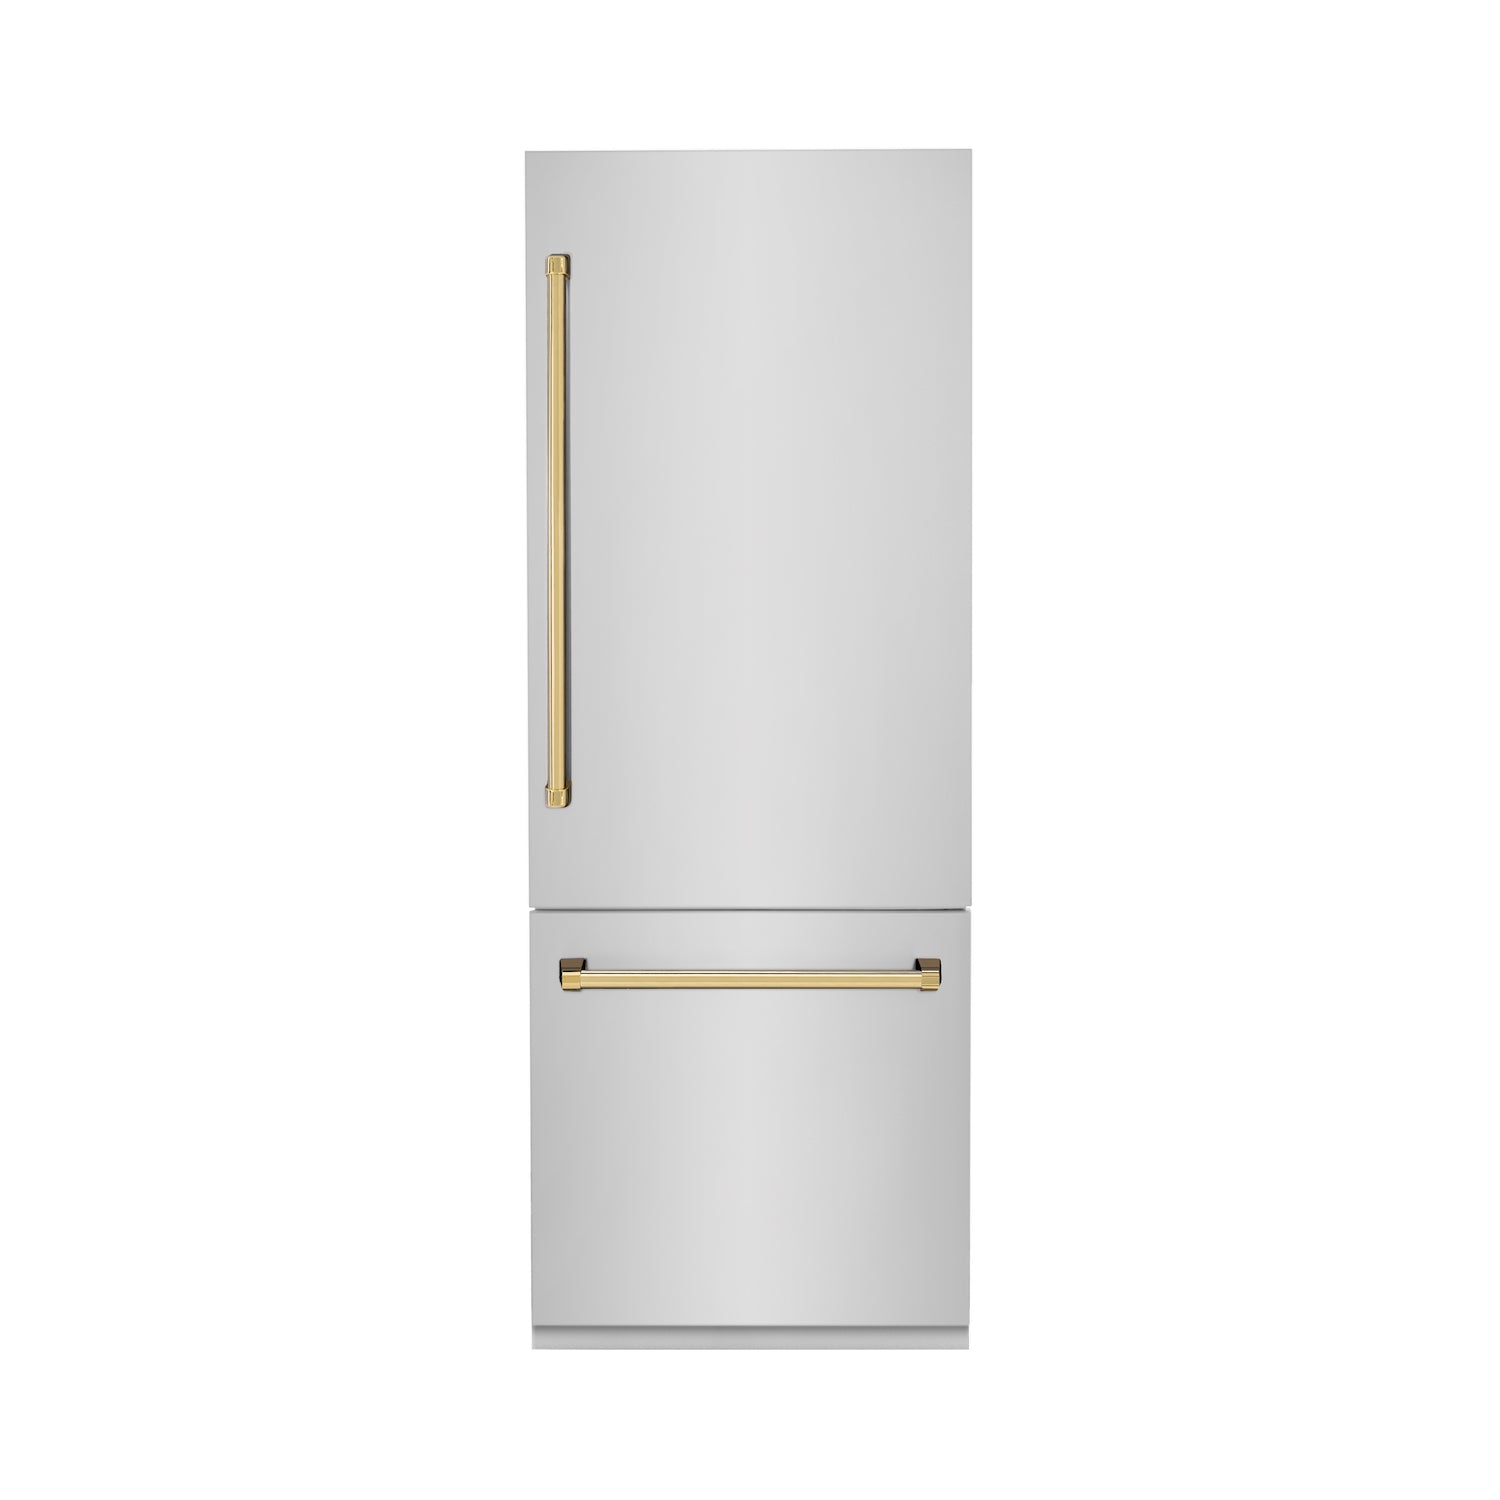 ZLINE 30” Autograph Edition 16.1 cu. ft. Built-in 2-Door Bottom Freezer Refrigerator with Internal Water and Ice Dispenser in Stainless Steel with Polished Gold Accents (RBIVZ-304-30-G)